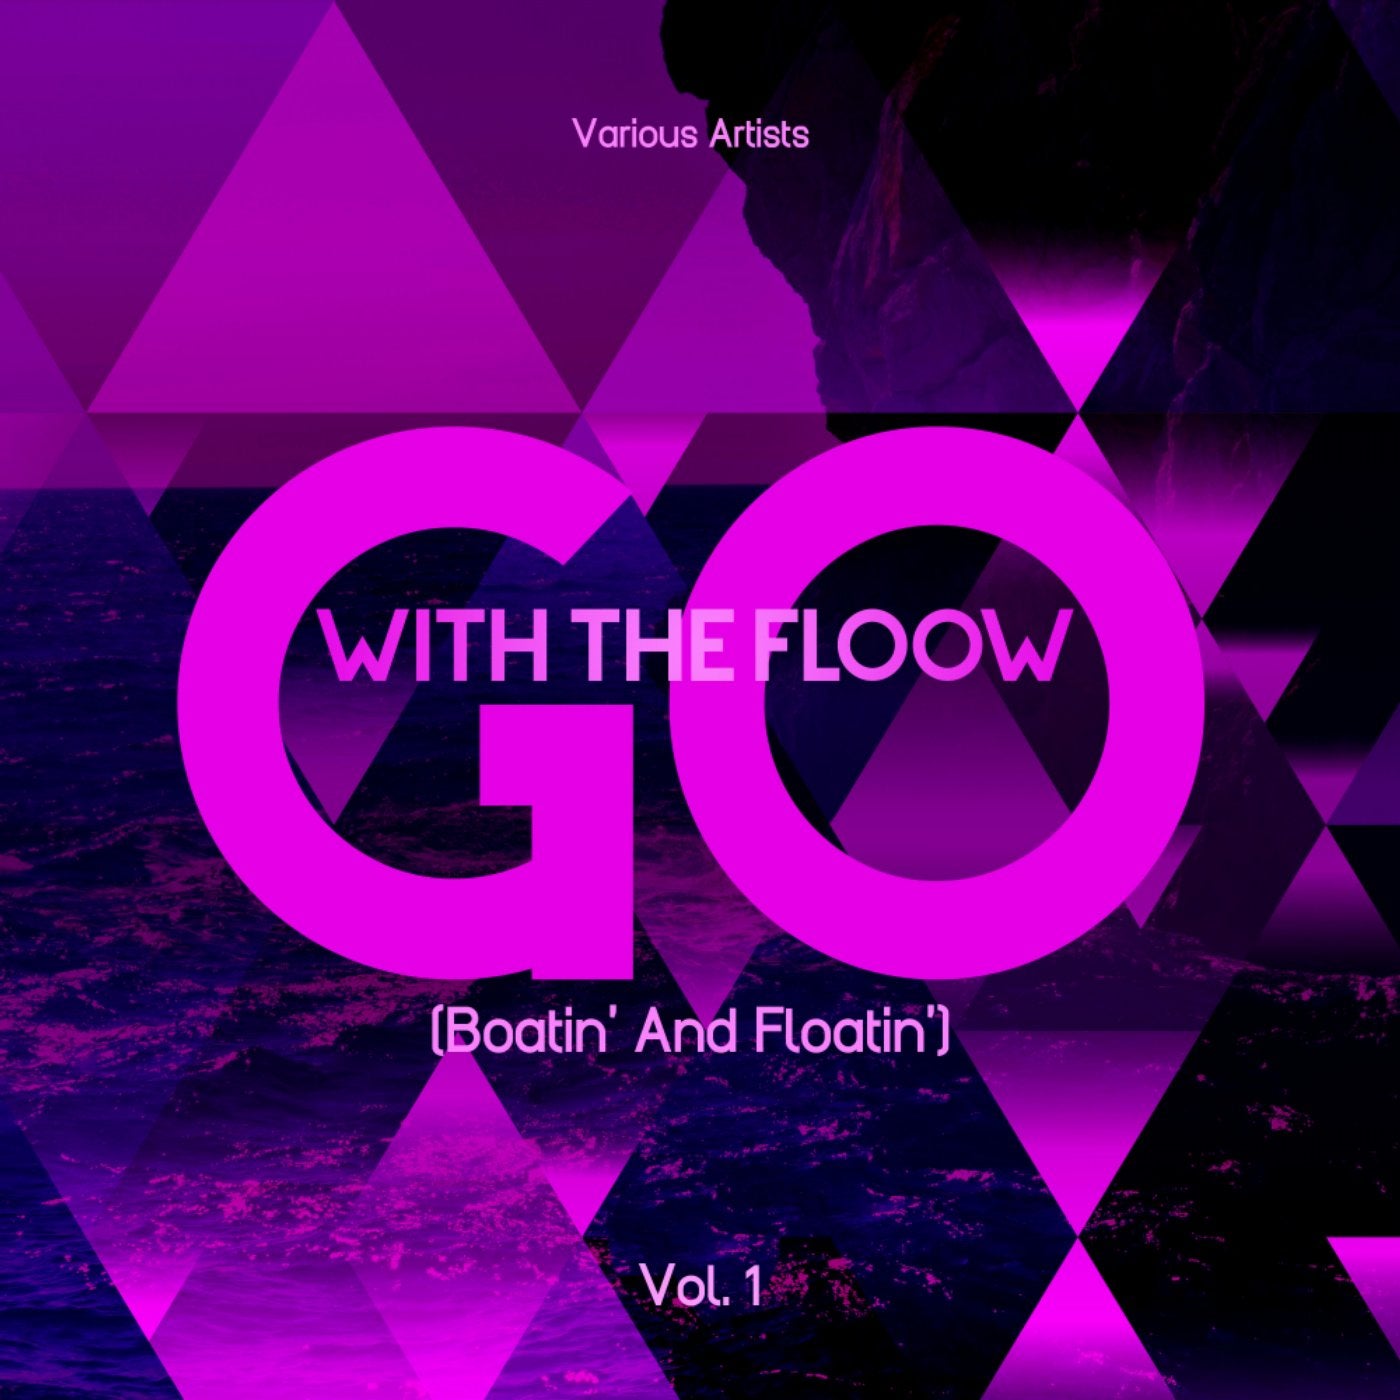 Go with the Flow (Boatin' and Floatin'), Vol. 1